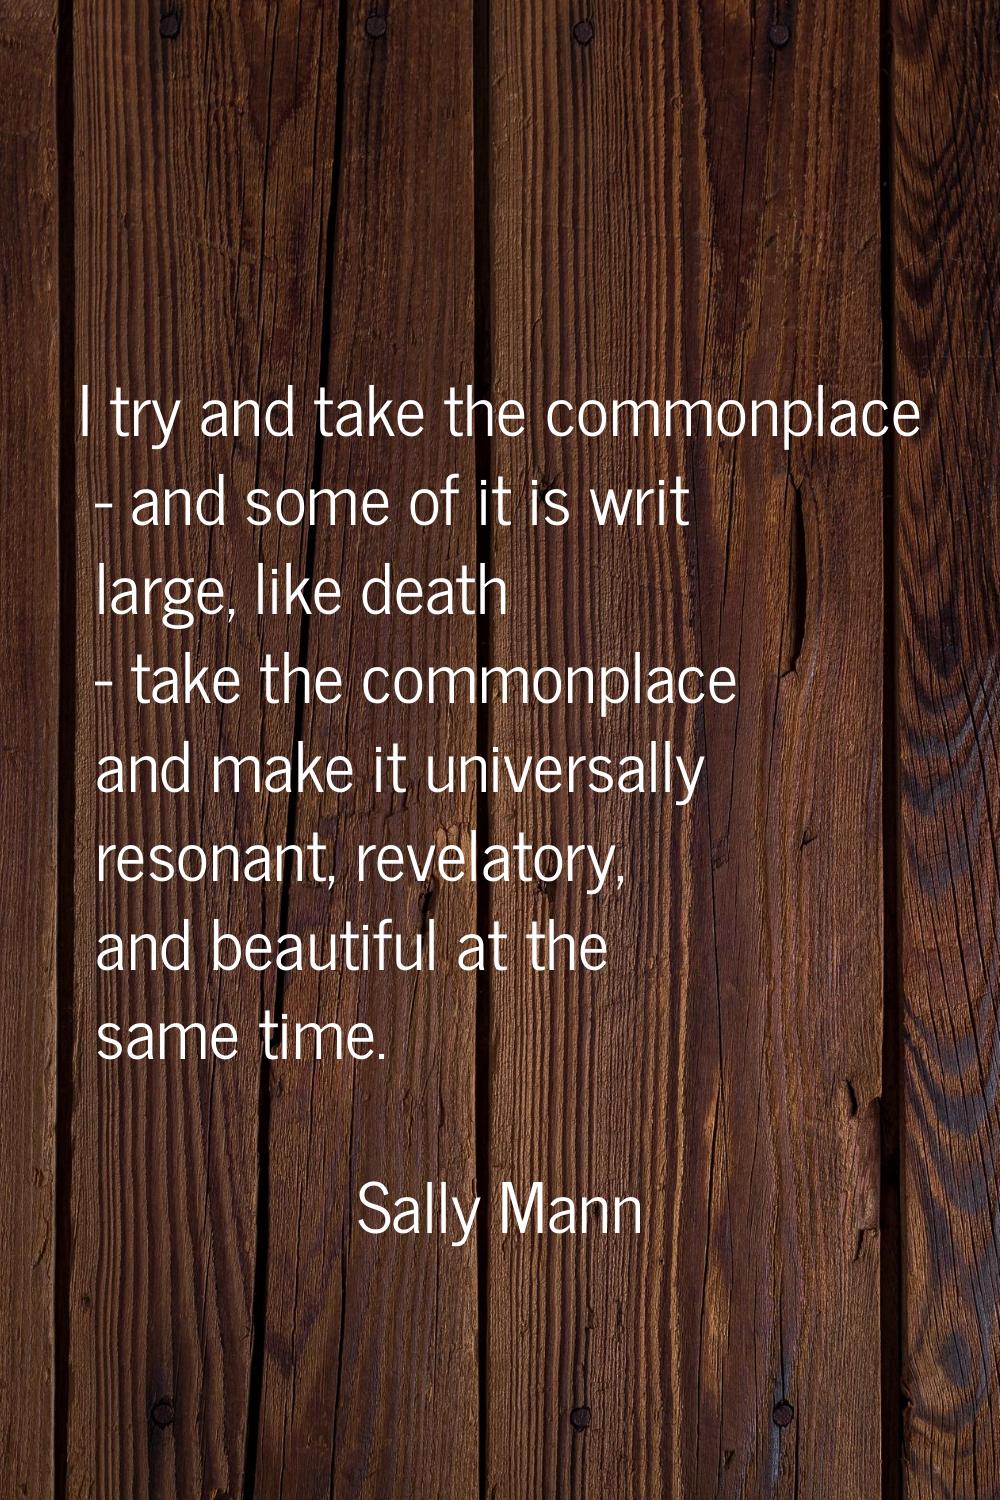 I try and take the commonplace - and some of it is writ large, like death - take the commonplace an